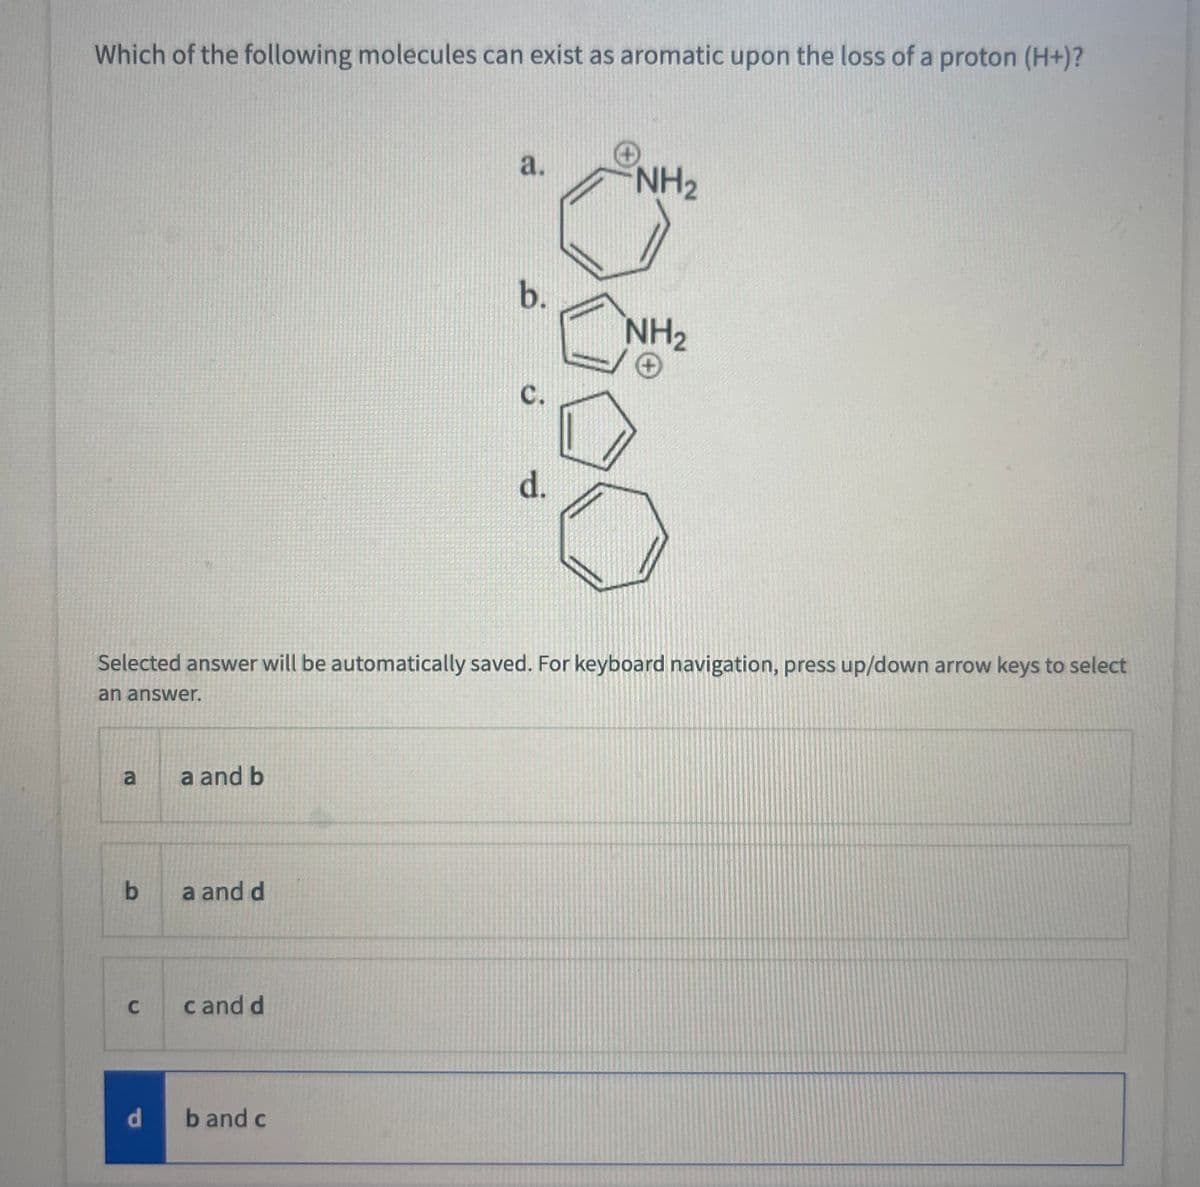 Which of the following molecules can exist as aromatic upon the loss of a proton (H+)?
an answer.
a
b
C
a and b
Selected answer will be automatically saved. For keyboard navigation, press up/down arrow keys to select
a and d
c and d
a.
d band c
b.
C.
d.
NH₂
NH₂